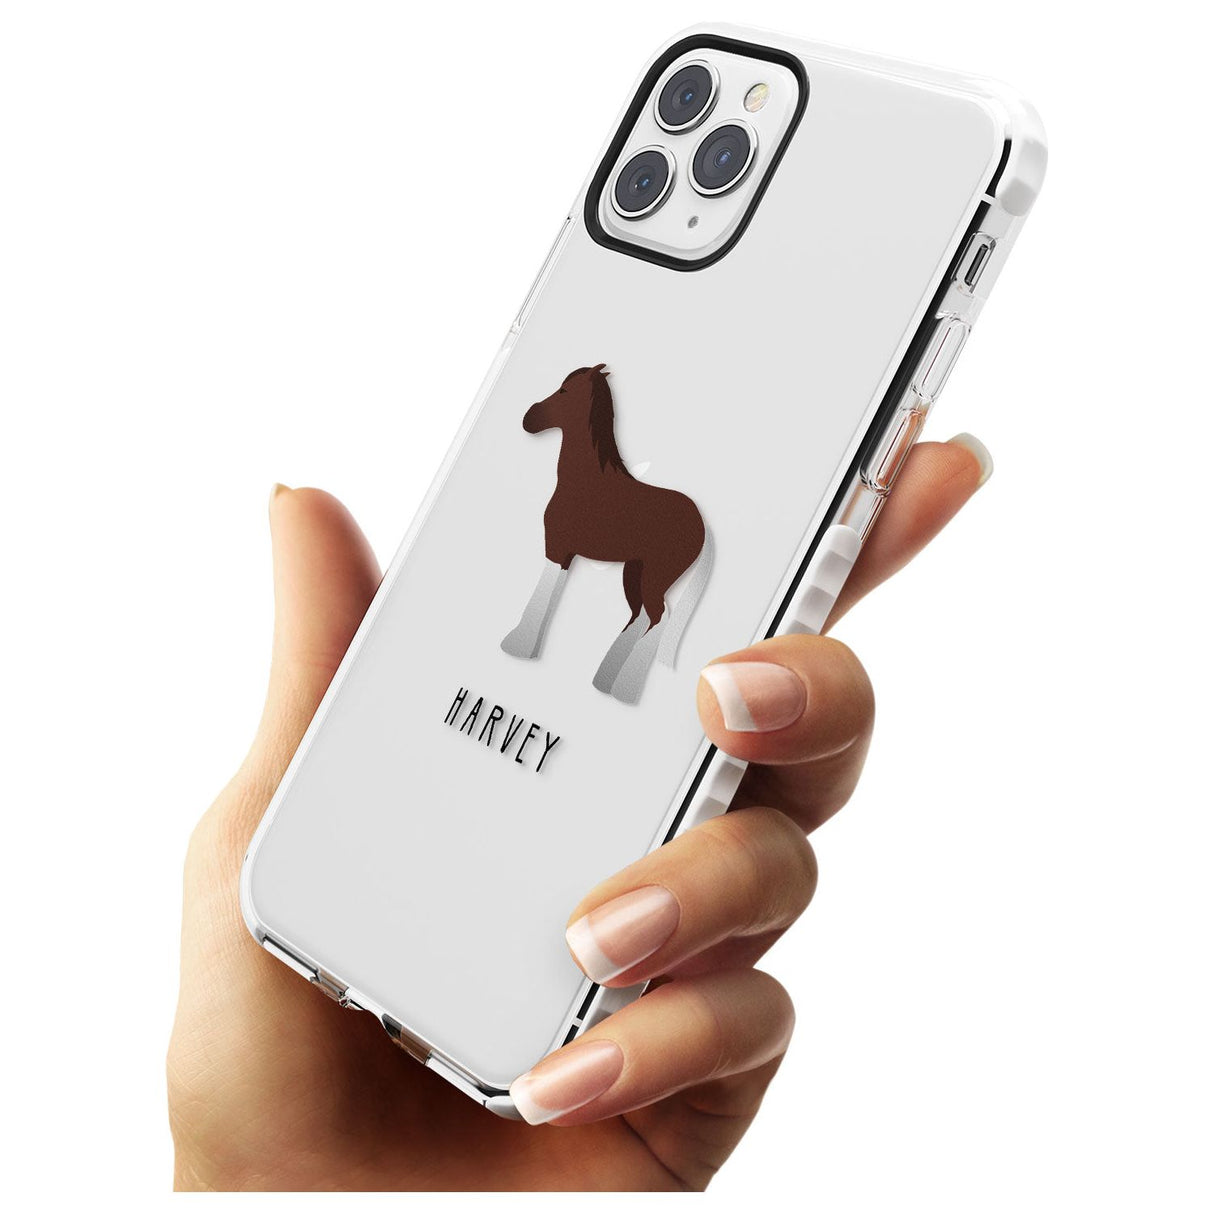 Personalised Brown Horse Impact Phone Case for iPhone 11 Pro Max